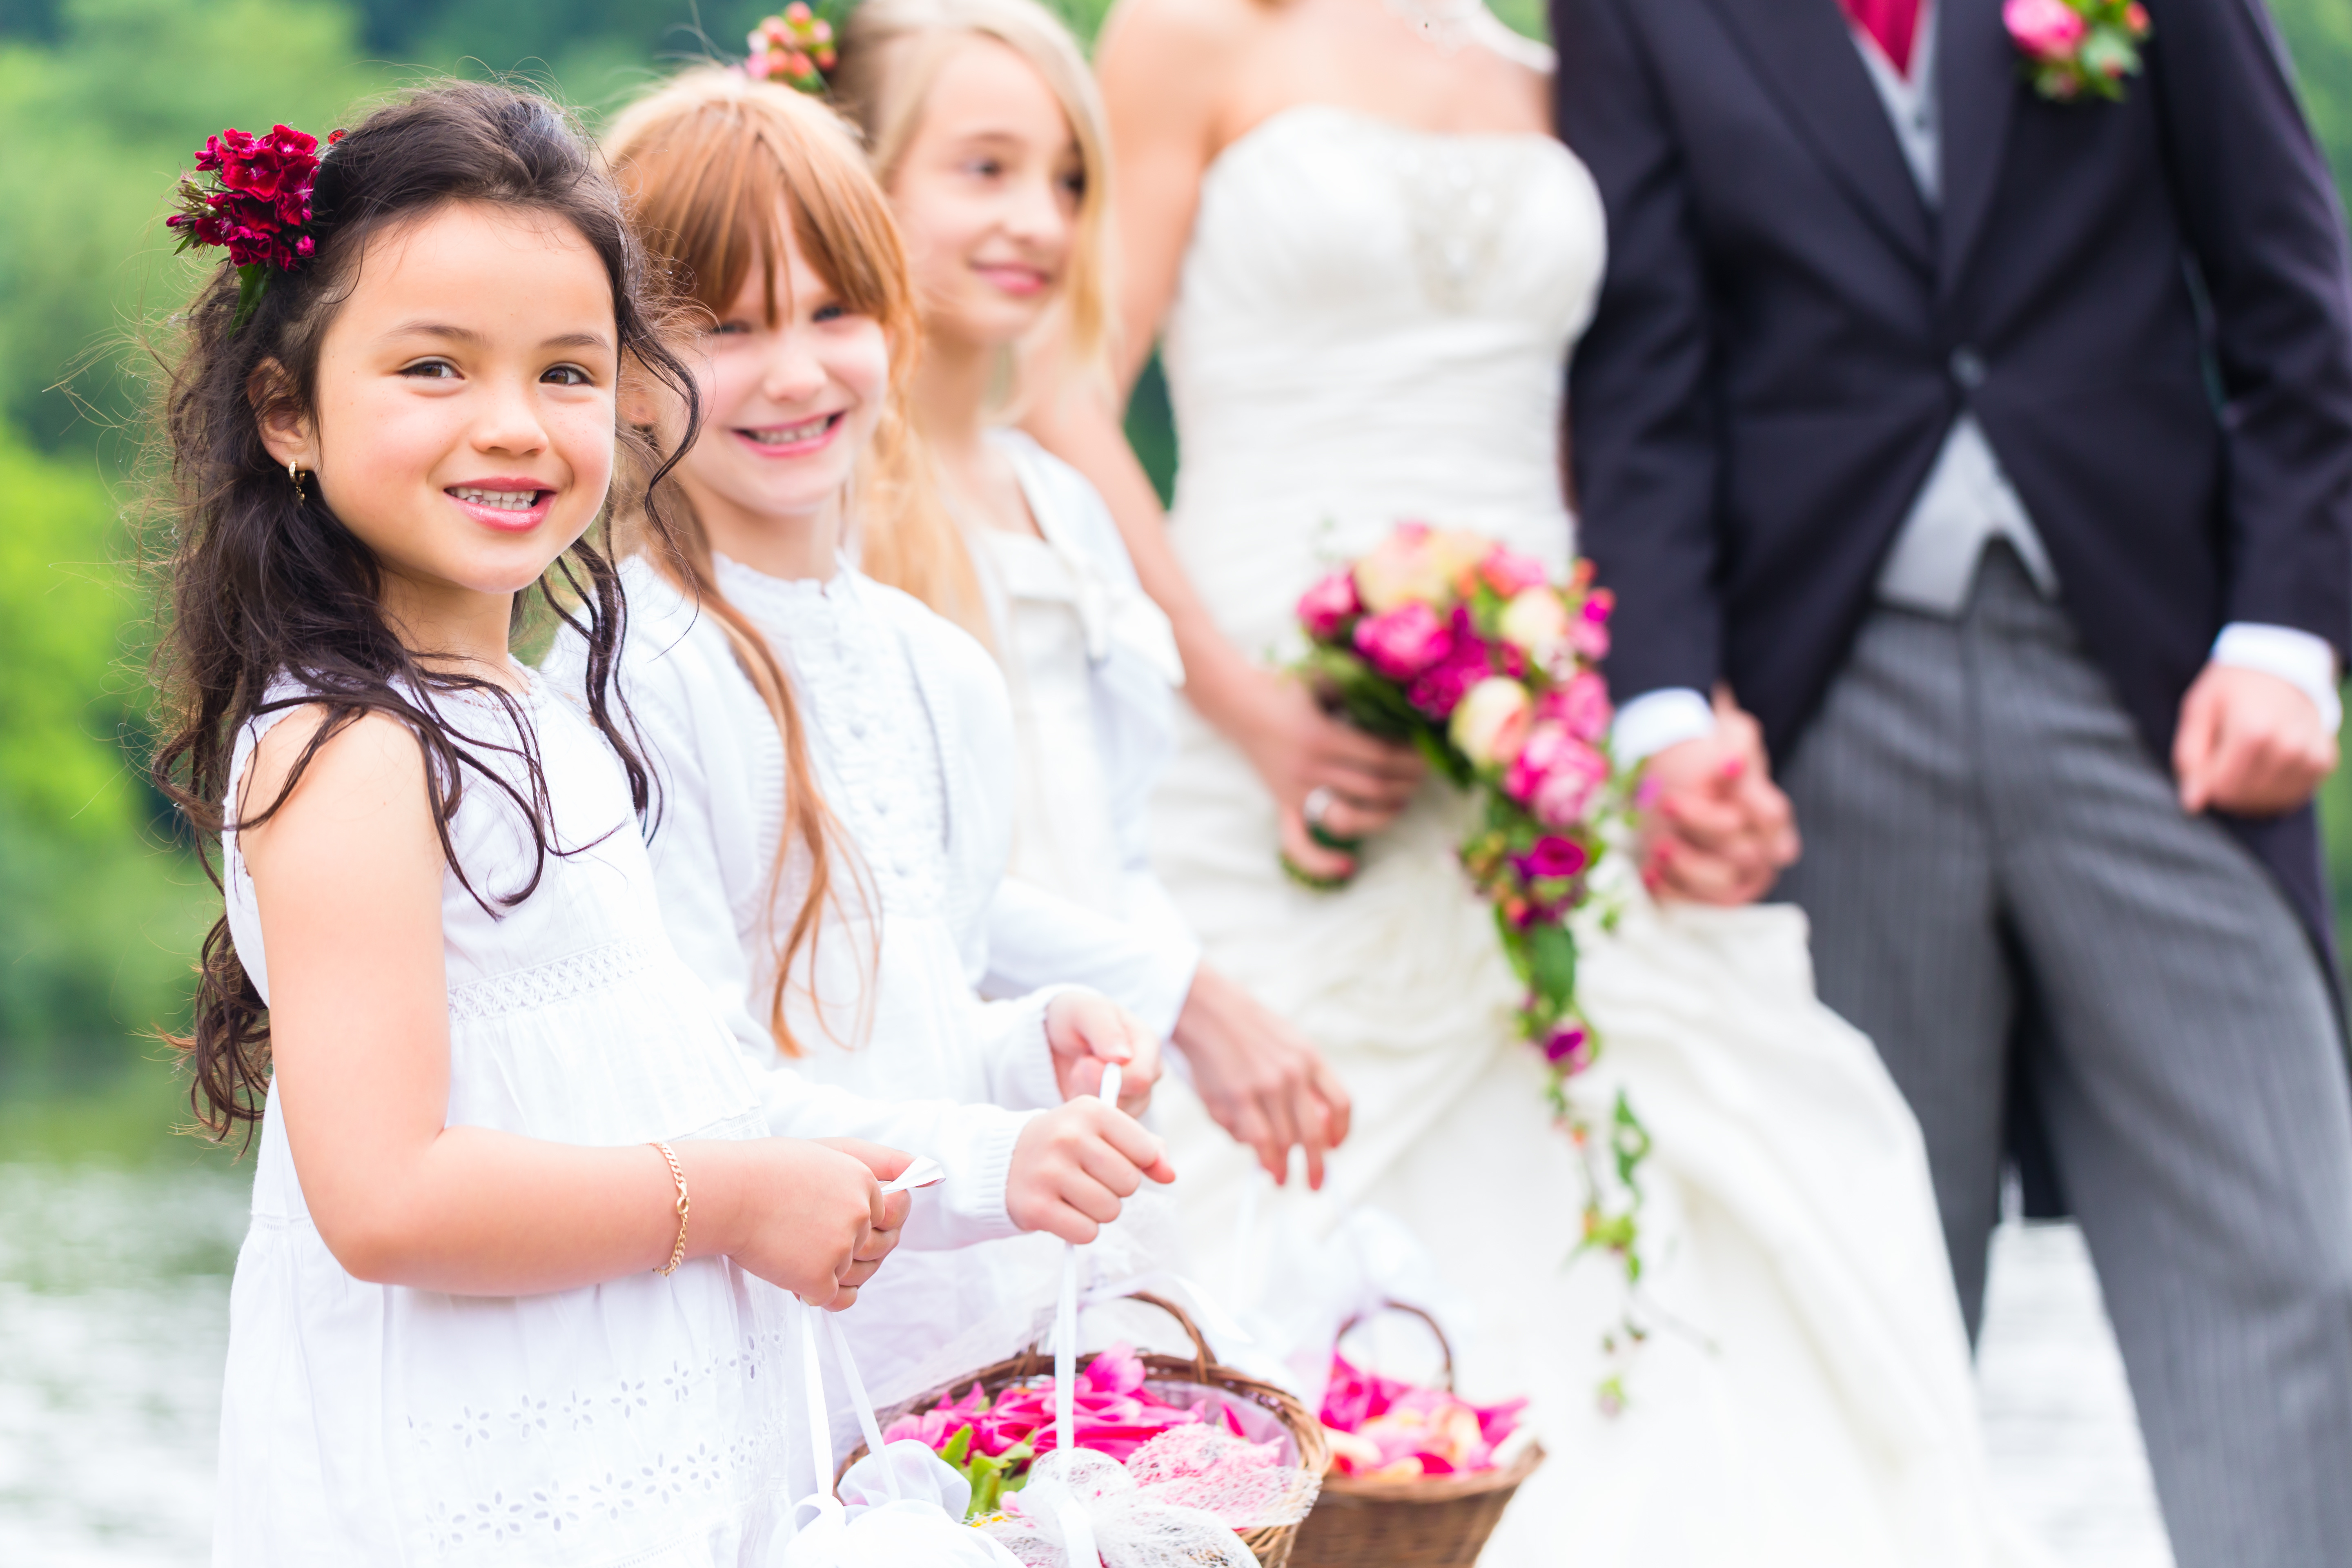 flower girls in white standing with a basket full of flowers